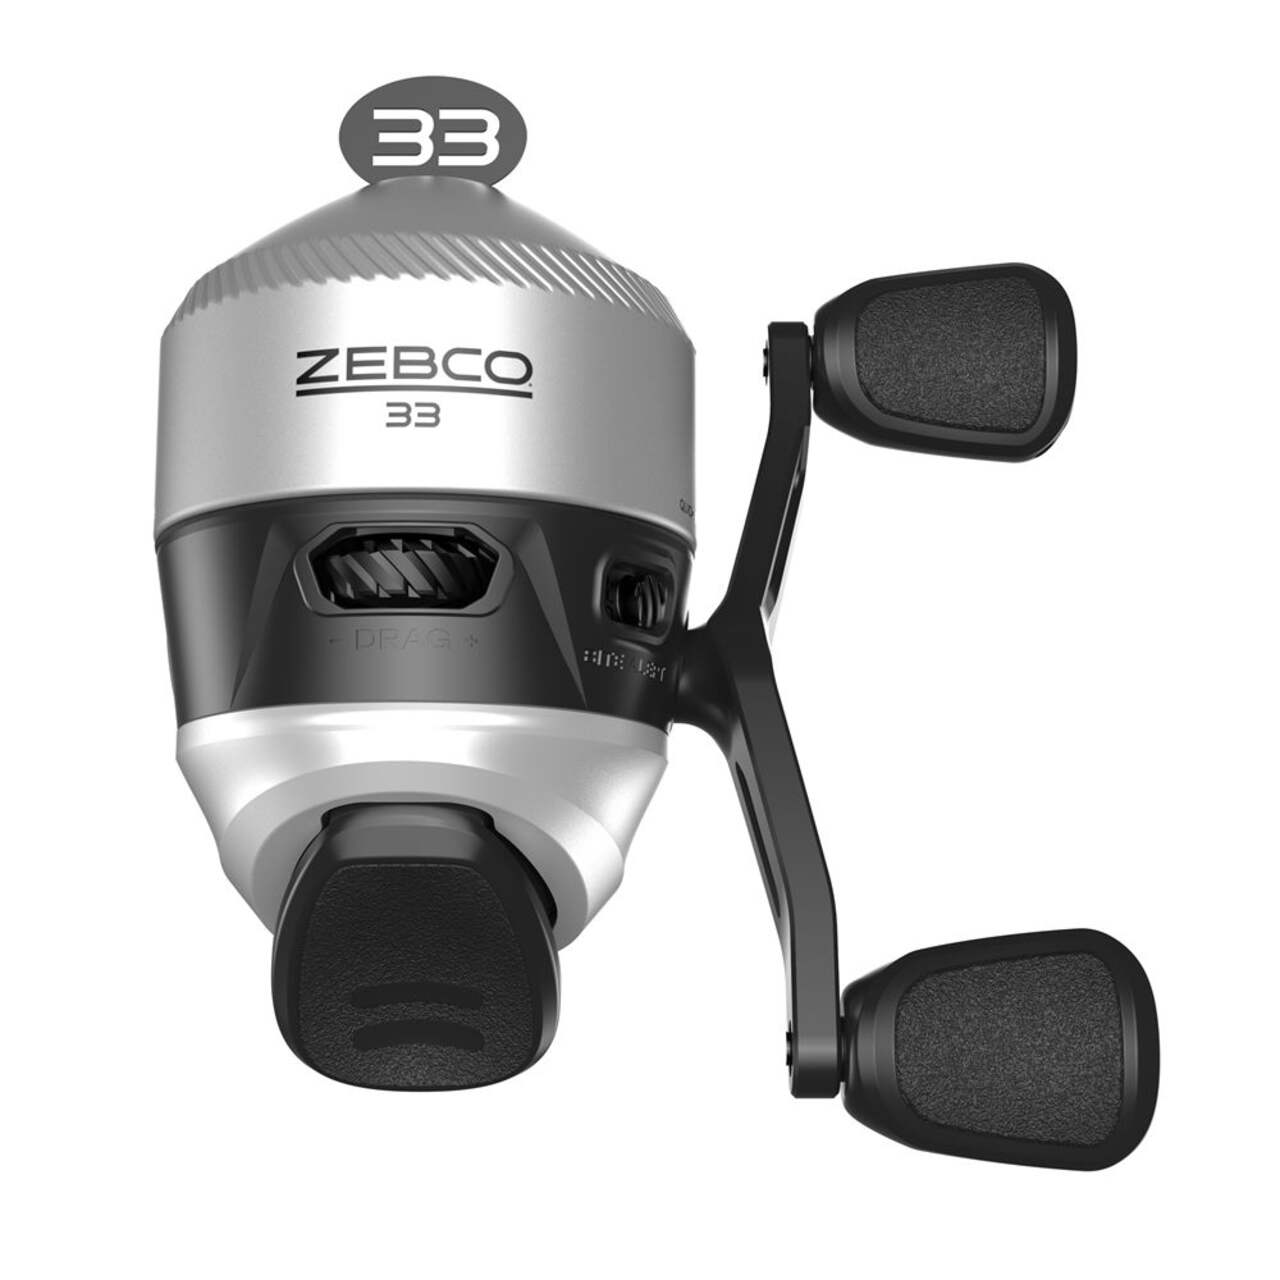 Zebco 33 Gold Spincast Fishing Reel, Size 30 Reel, Changeable Right- or  Left-Hand Retrieve, Durable All-Metal Gears, Pre-Spooled with 10-Pound Zebco  Cajun Fishing Line, Silver/Gold 